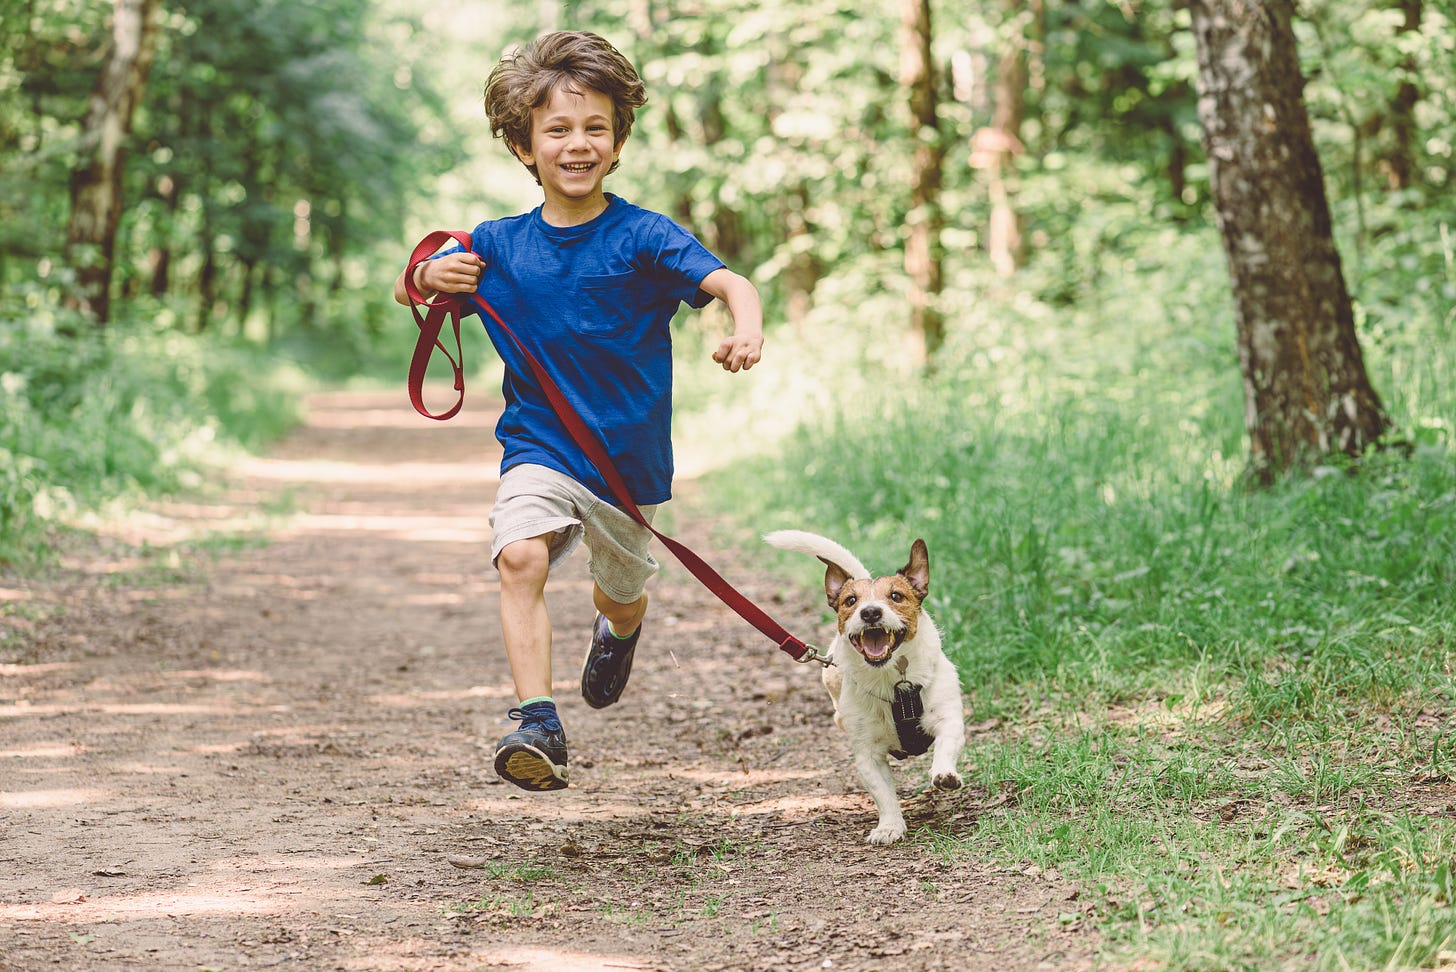 This picture captures movement: A boy is running through the woods with his dog. you can see the dog's tail moving behind him, and the boy's hair is lifting into the air as he moves. The boy is wearing a royal blue shirt; the dog is small, with a white body and white and brown face.